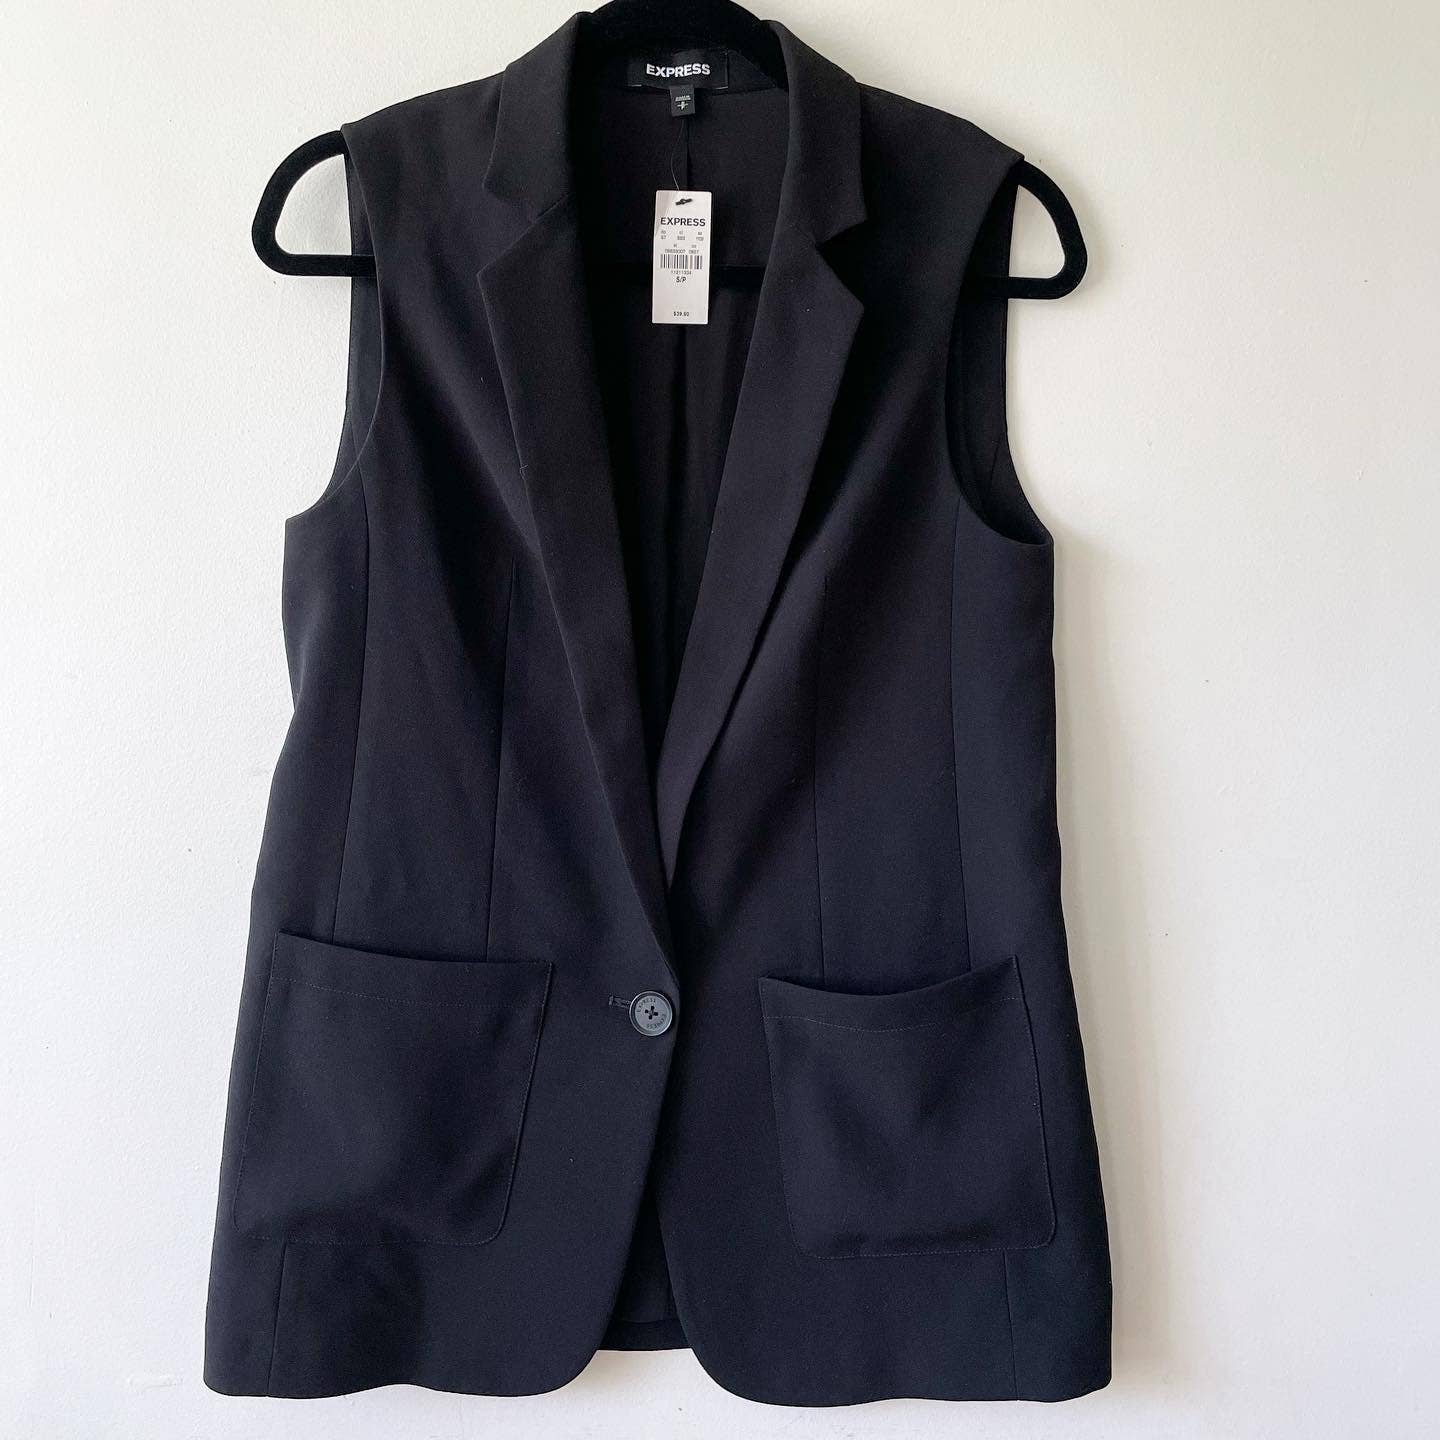 Express Black Sleeveless Mid Length Collared Suit Vest